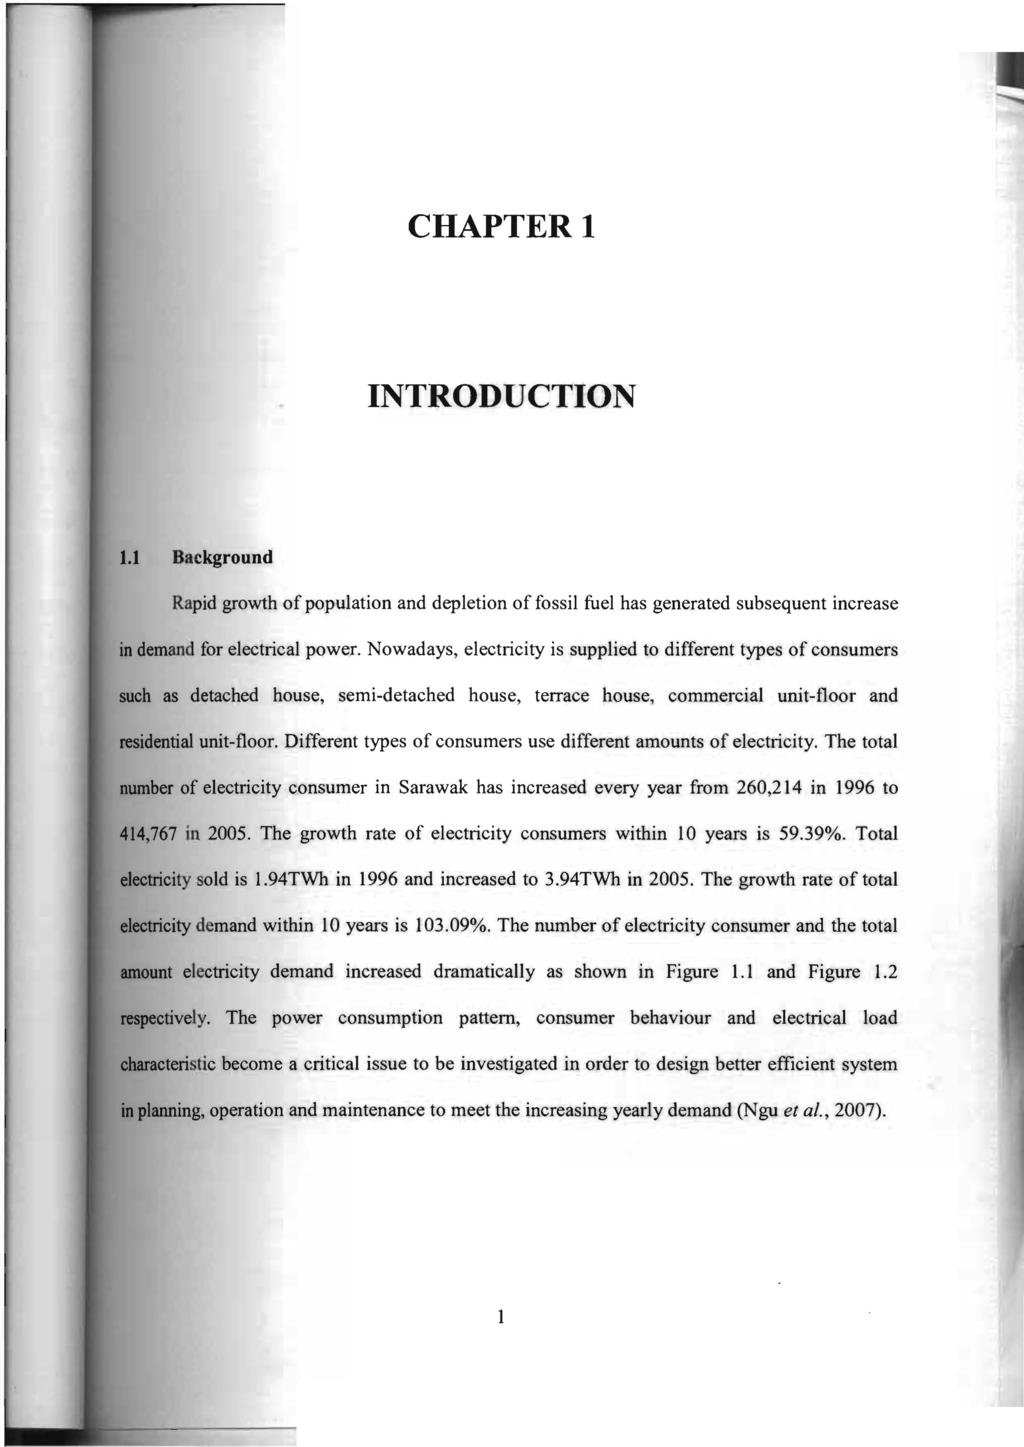 CHAPTER! INTRODUCTION 1.1 Background Rapid growth of population and depletion of fossil fuel has generated subsequent increase in demand for electrical power.